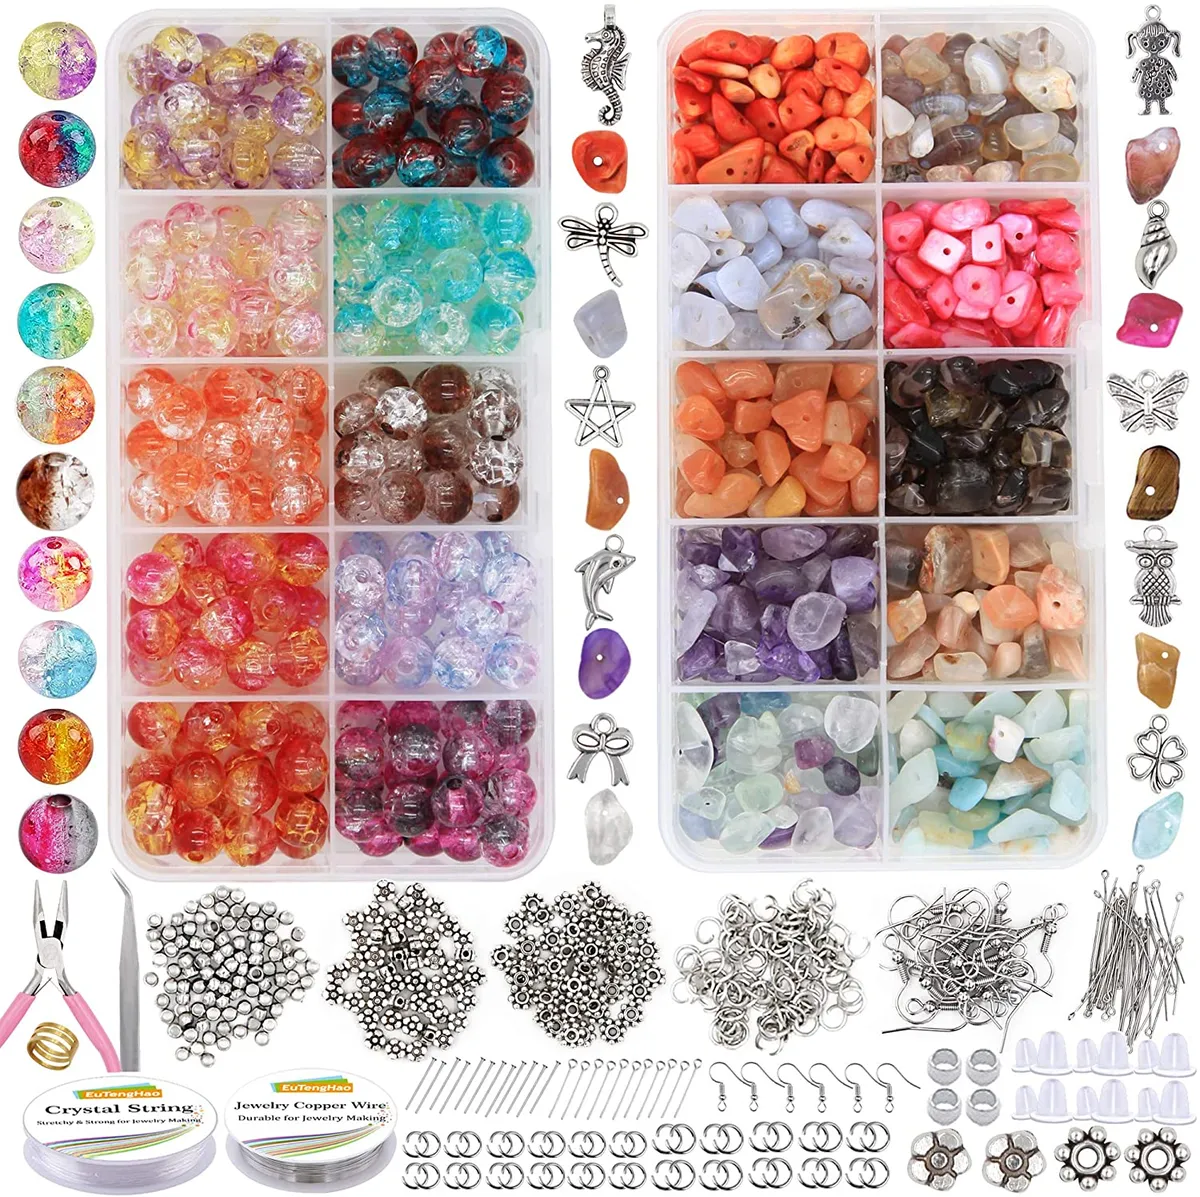 Charm Bracelet Kit, Do It Yourself Jewelry Making Kit, Over 50 Charms,  Findings, Digital Instructions, Choose Full Kit or Charms Only, 100 